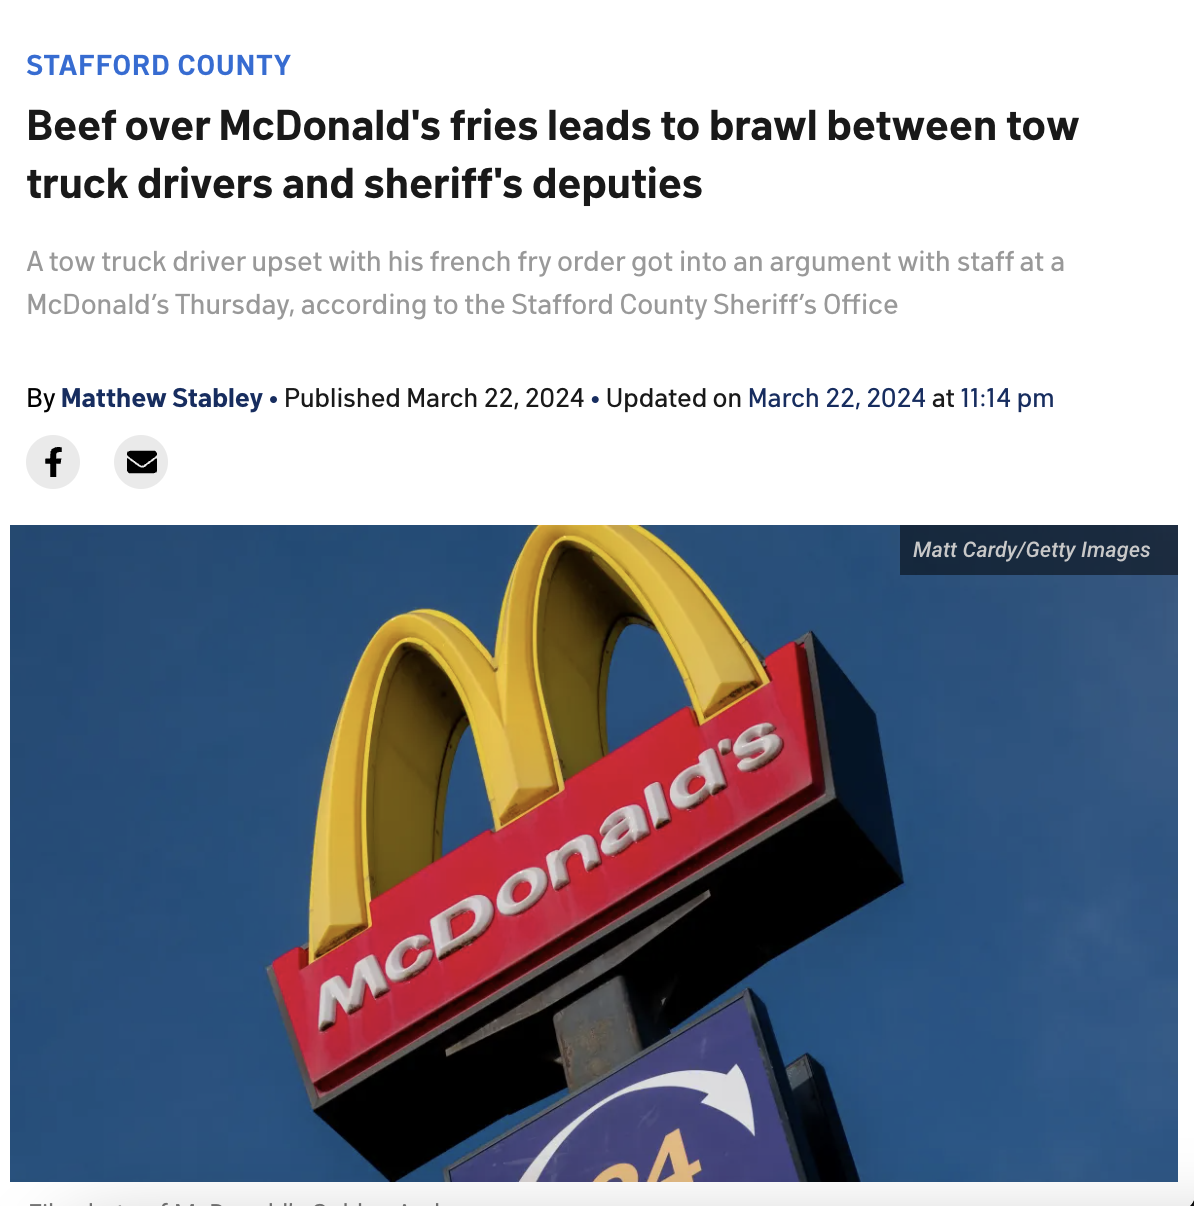 screenshot - Stafford County Beef over McDonald's fries leads to brawl between tow truck drivers and sheriff's deputies A tow truck driver upset with his french fry order got into an argument with staff at a McDonald's Thursday, according to the Stafford 